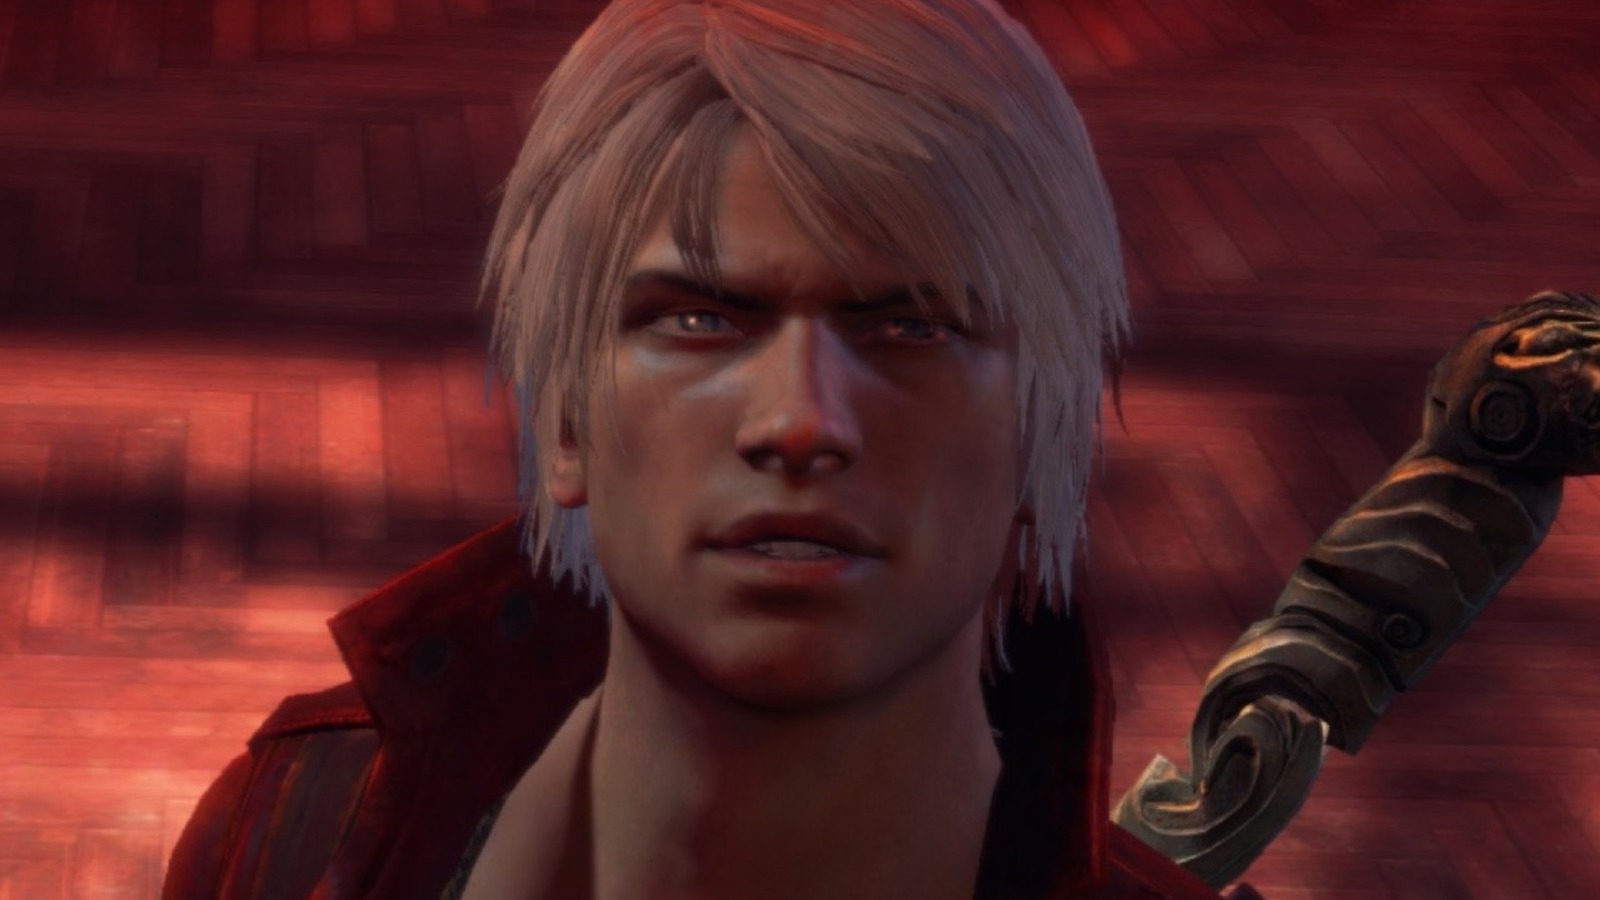 Evolution of Dante from Devil May Cry series 